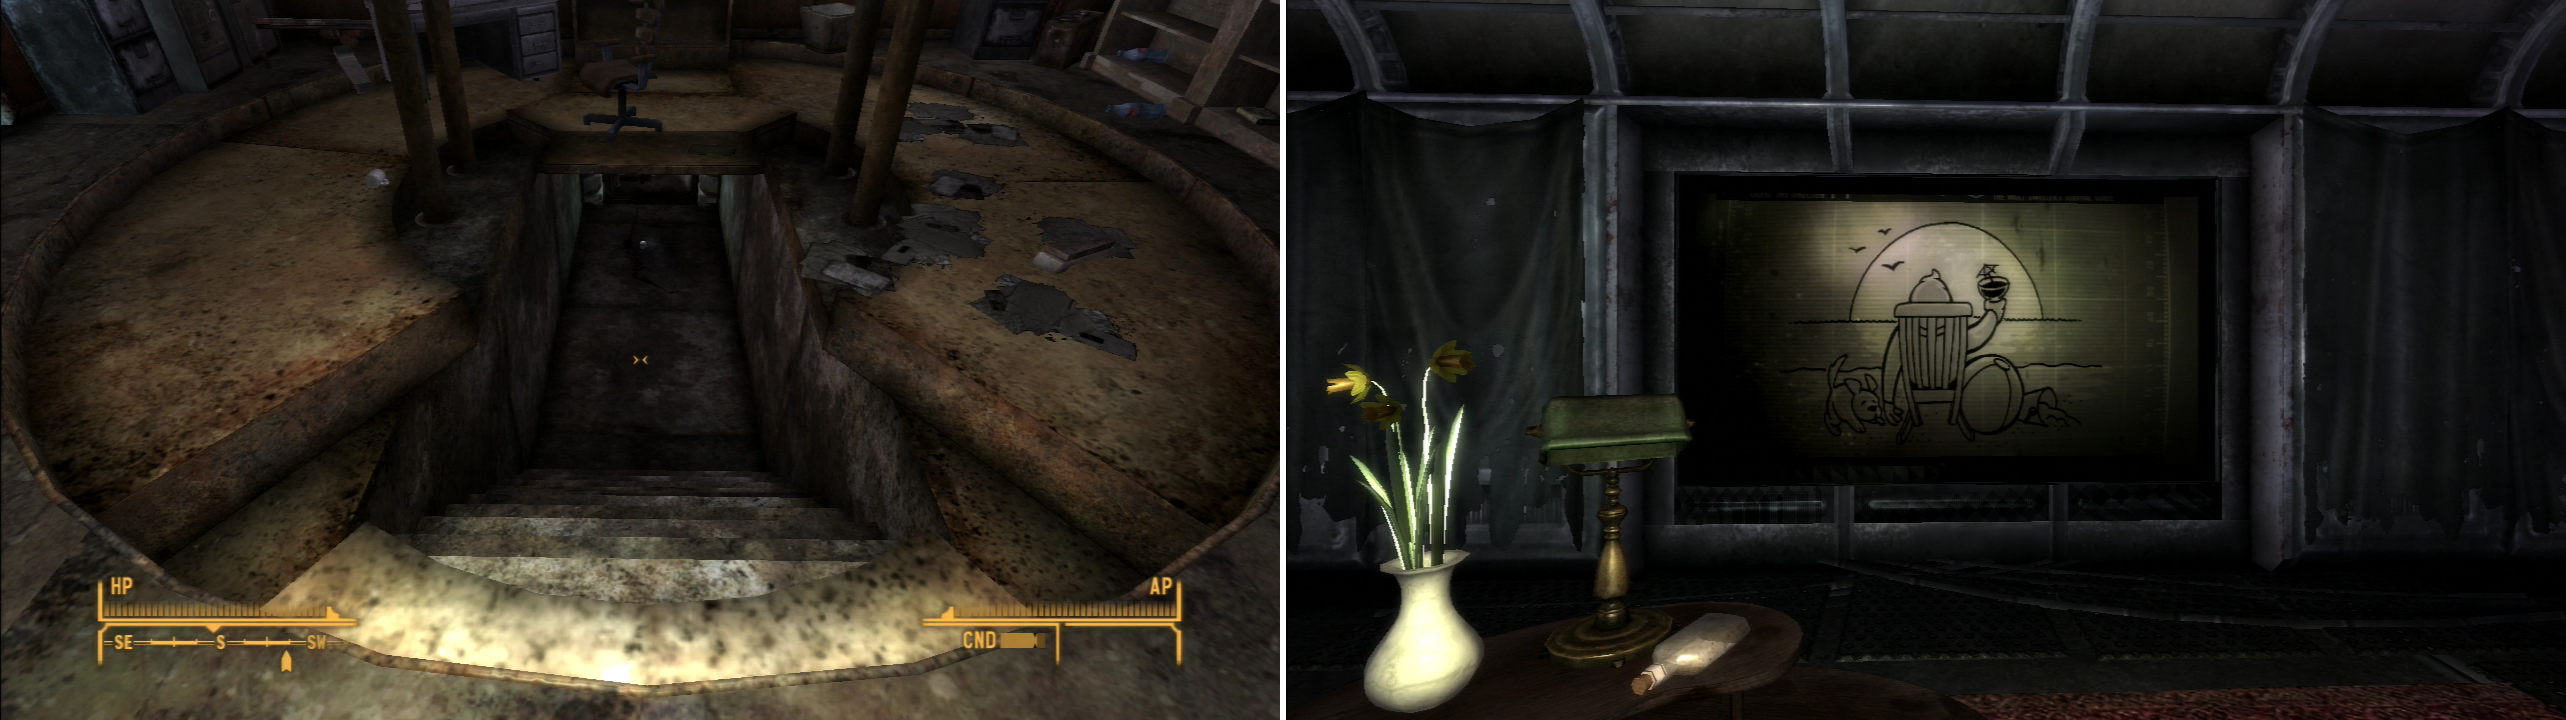 Open the “sacrificial chamber” under the Overseer’s desk (left) then watch the presentation in the room below (right).